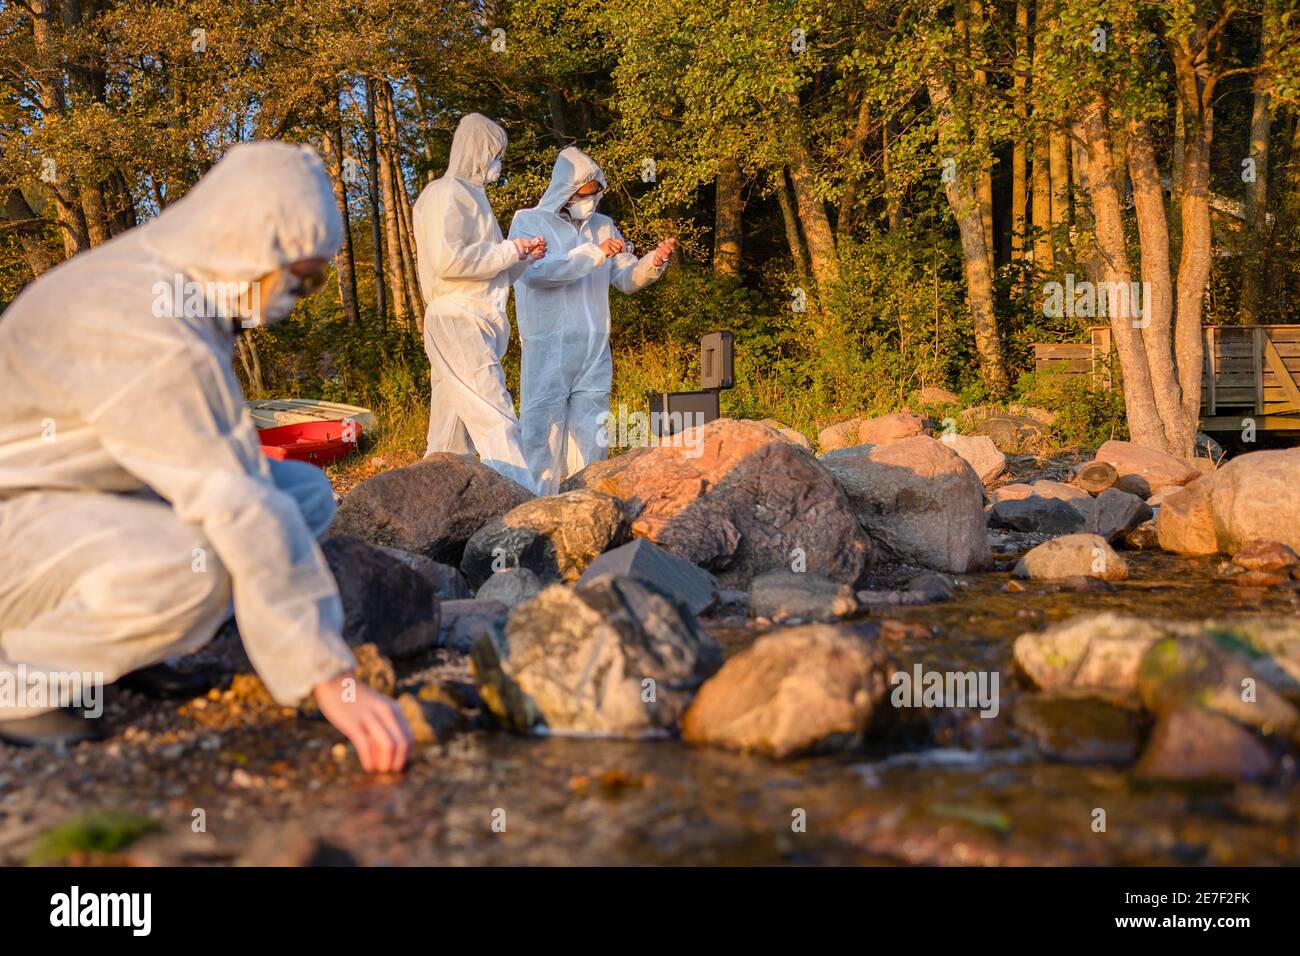 Team of researchers analyzing water sample at seashore Stock Photo